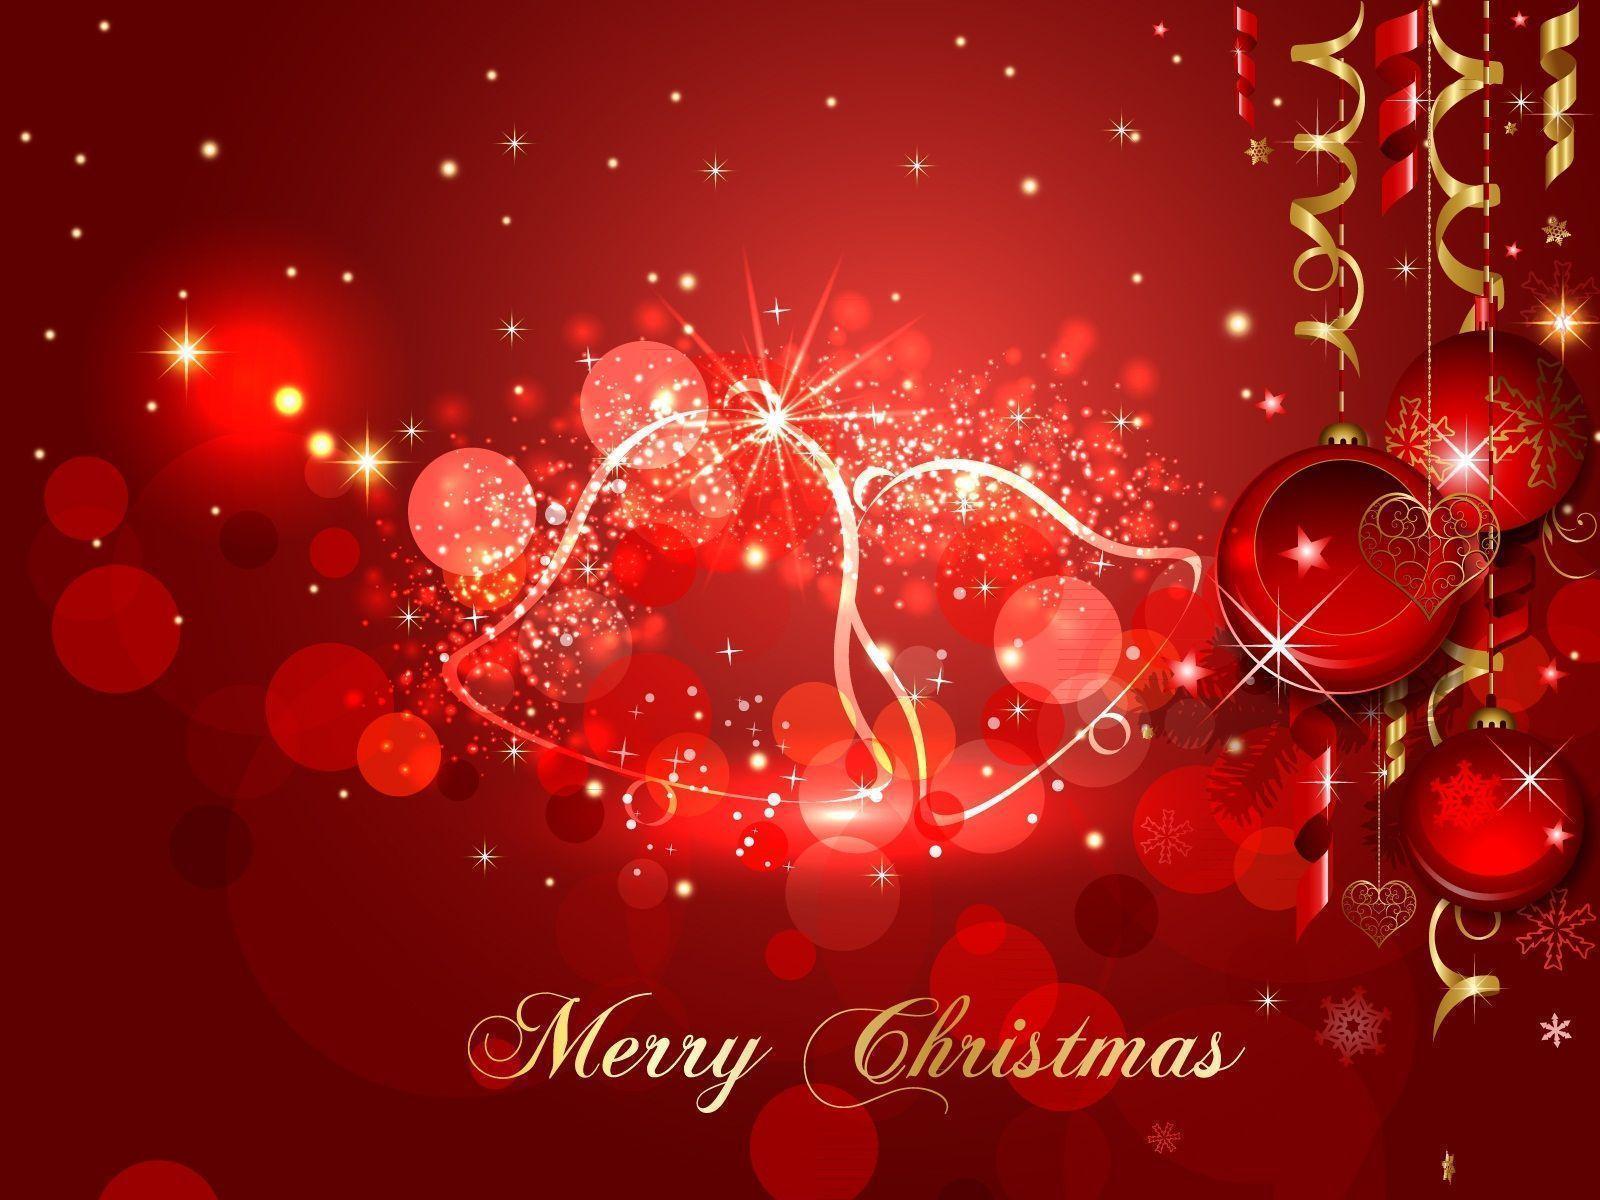 Merry Christmas Wallpaper. Merry Christmas Picture